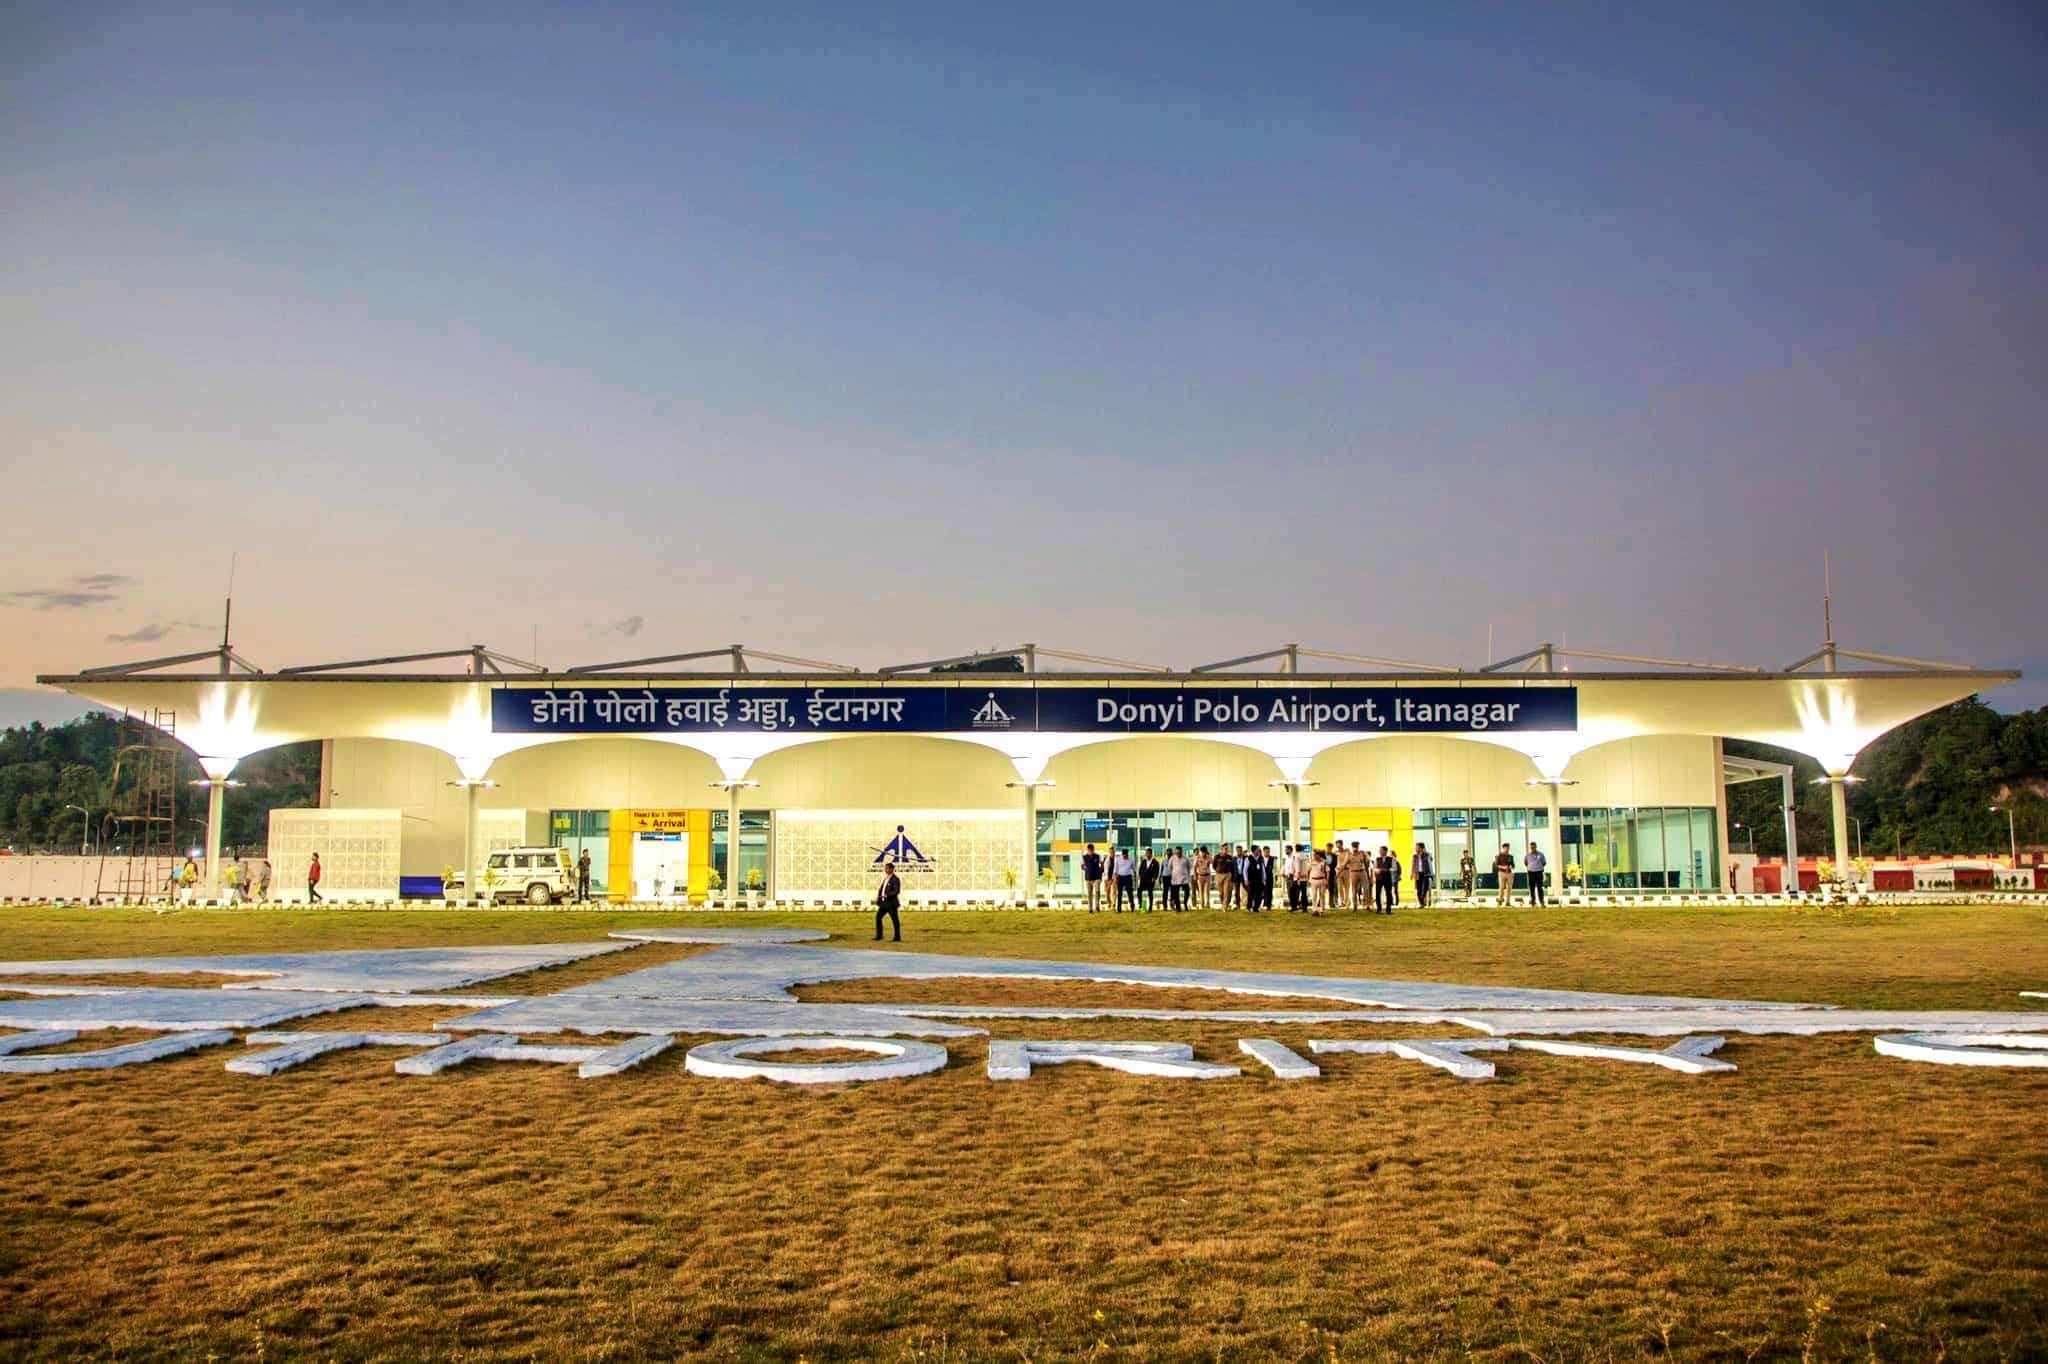 Image of Itanagar's Donyi Polo Airport shared by BJP National Spokesperson Sambit Patra on Twitter.